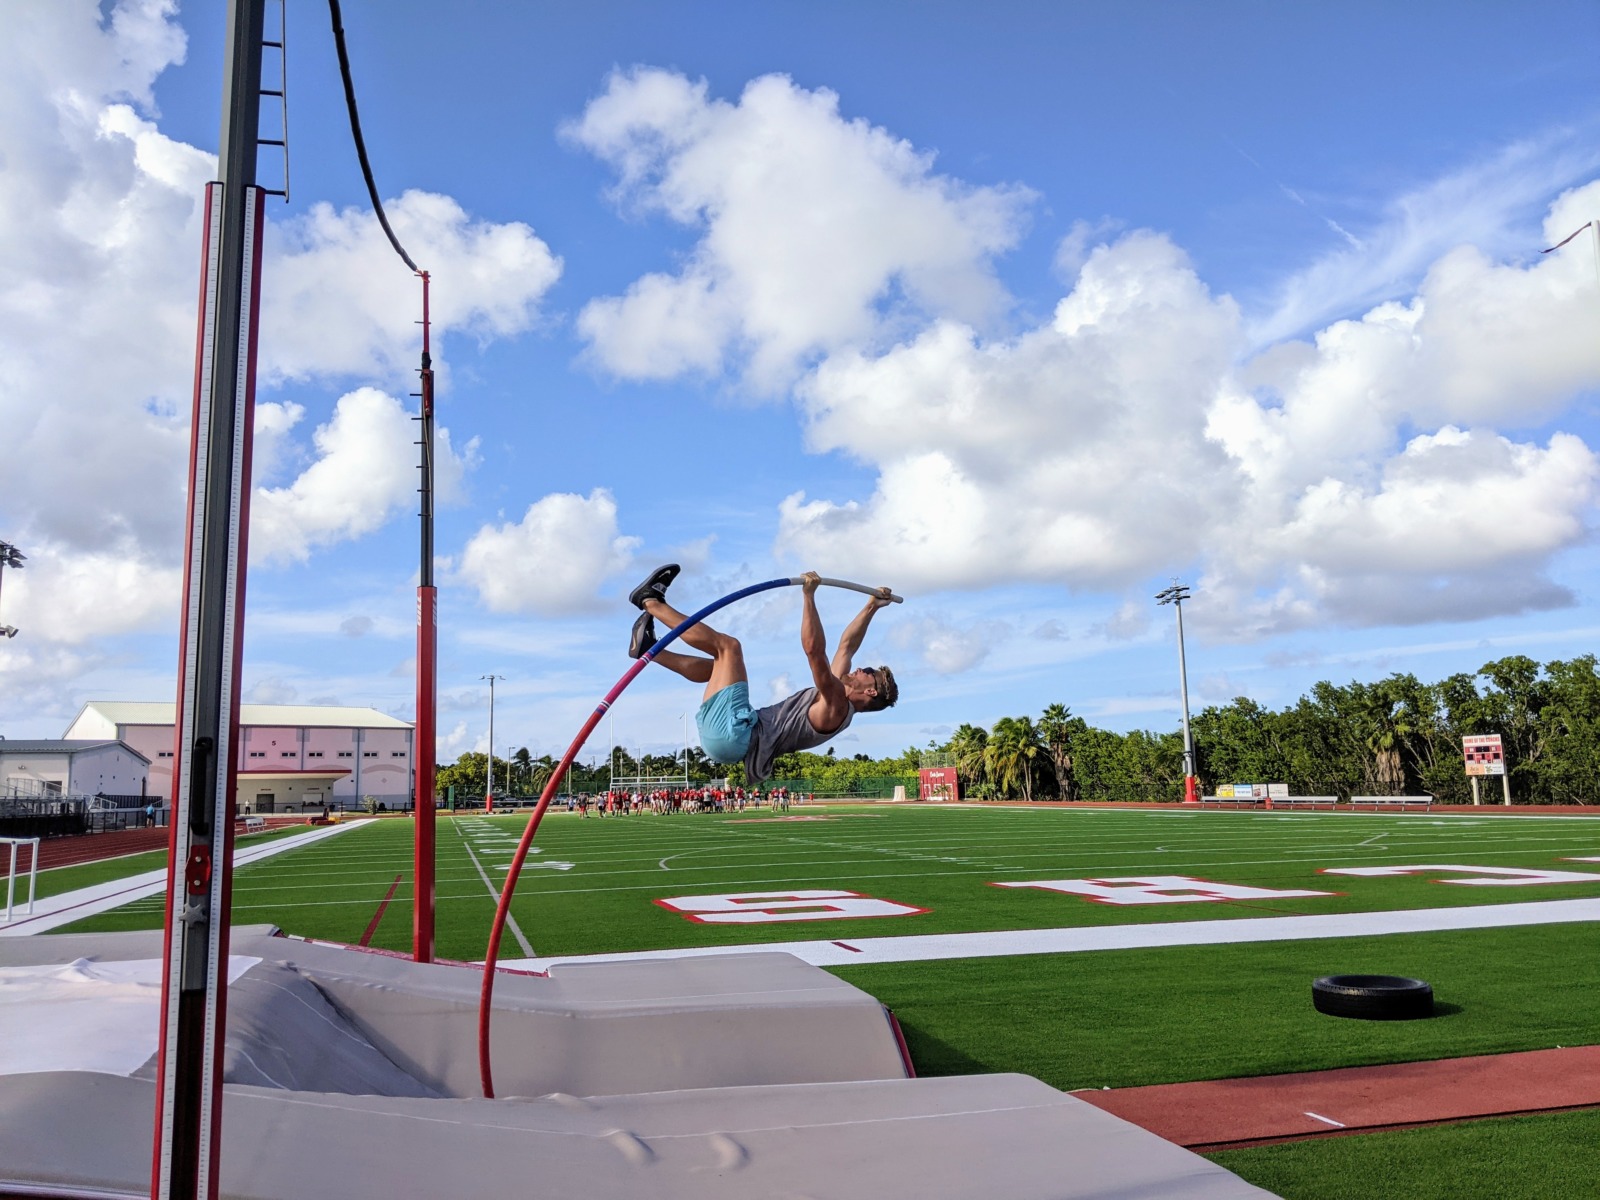 FREE POLE VAULT EXPO IN KEY WEST SATURDAY